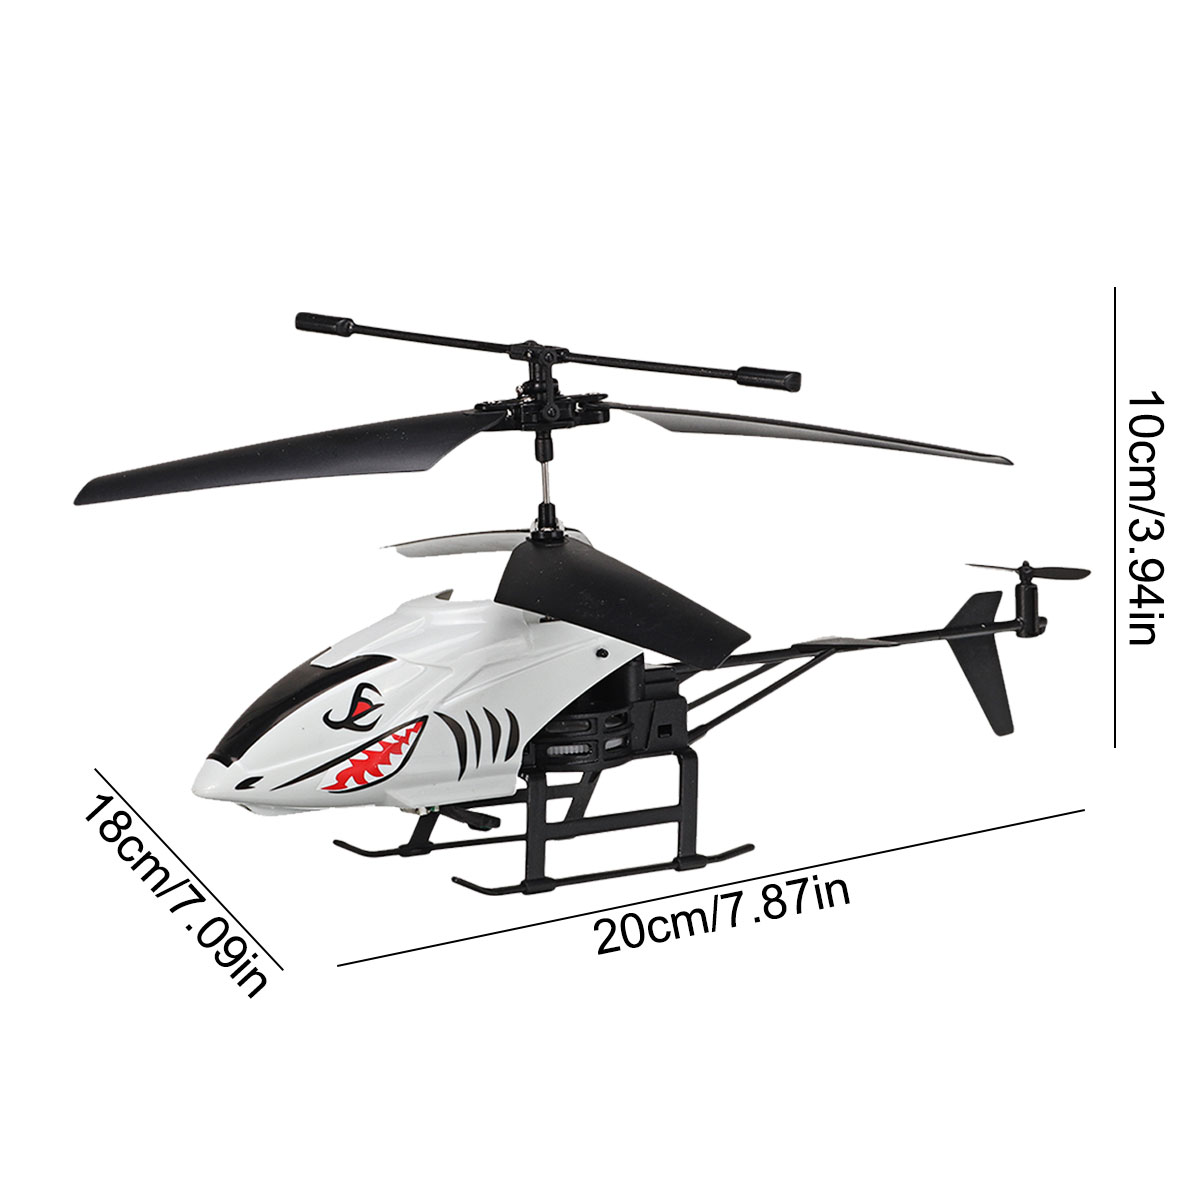 2CH 2.4G Wolf/Shark/Eagle Style USB Charging RC Helicopter RTF for Children Outdoor Toys